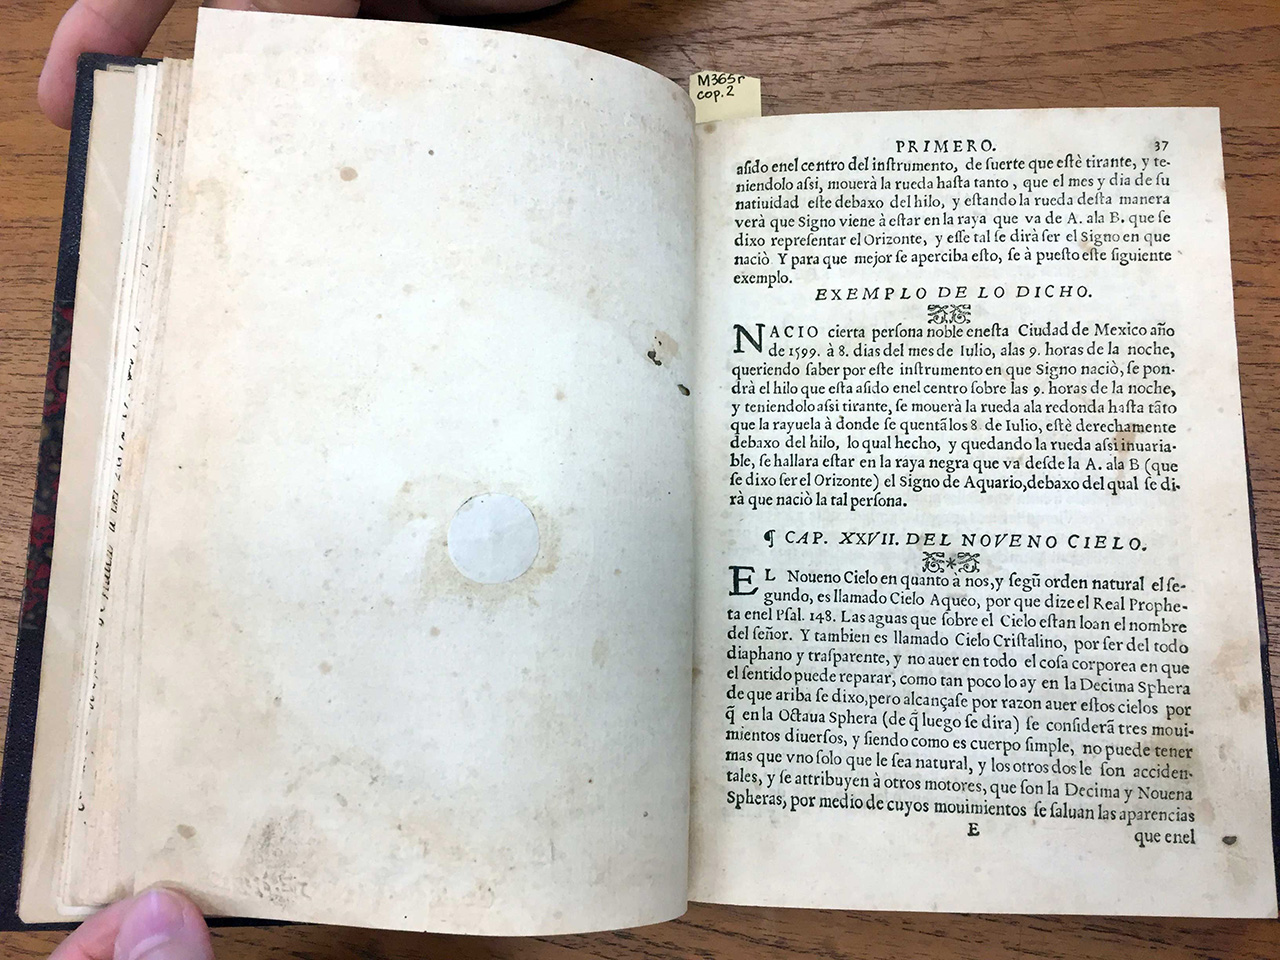 (Figs 11 & 12) Henrrico Martínez, Repertoire of the Times, and Natural History of this New Spain, 1606. Printed in the author’s own Printing House. Front and back of page with horoscope artifact, which skipped a page number.